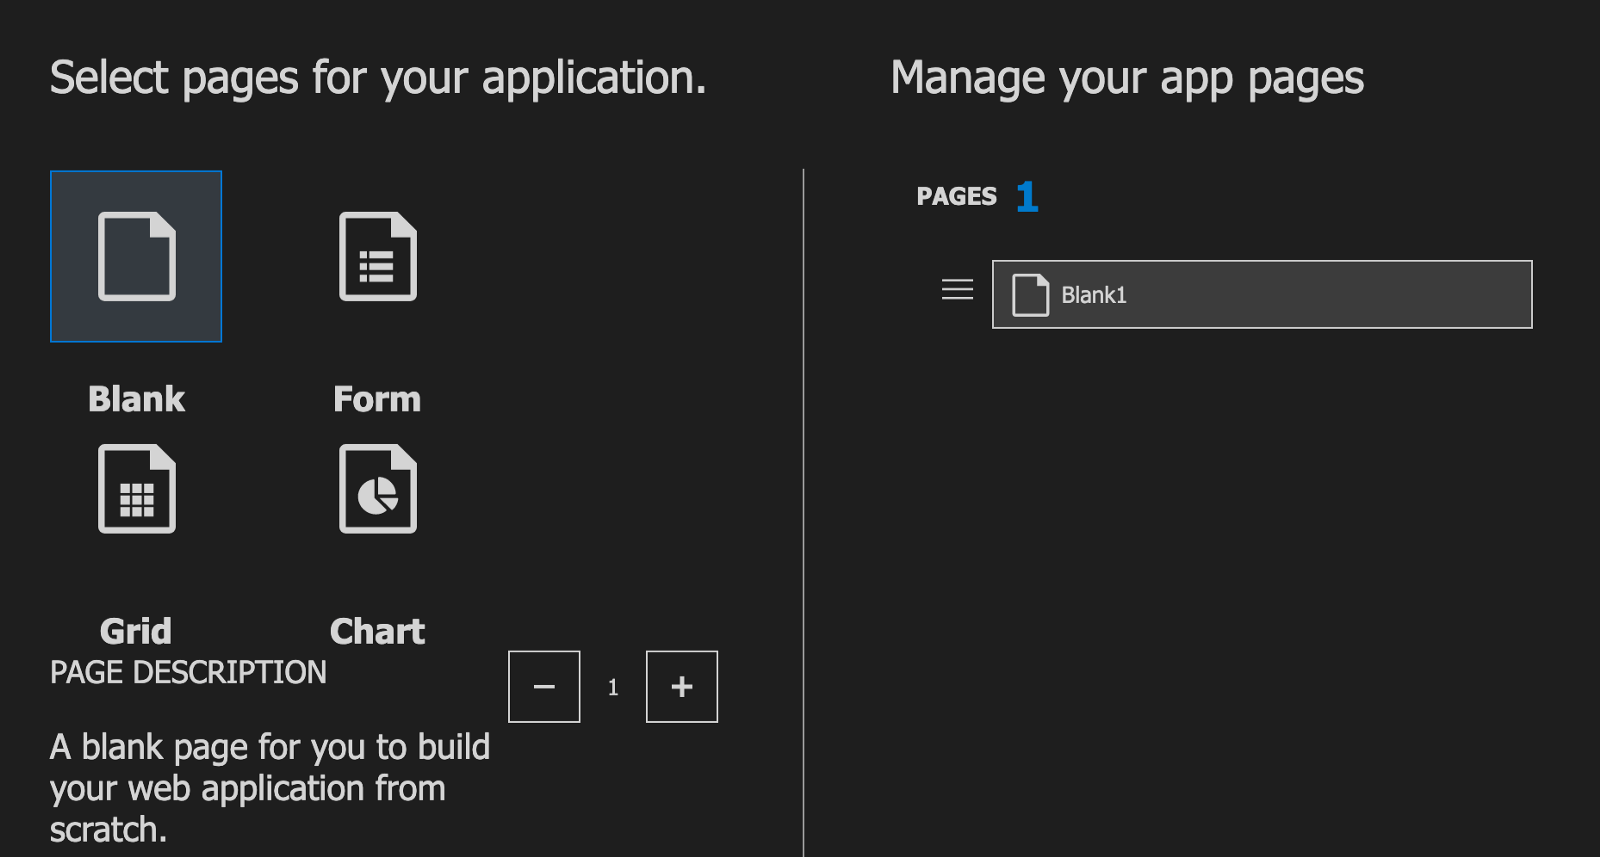 Select pages for your application. We have chosen blank. Then Manage your app pages. We have 1 page.